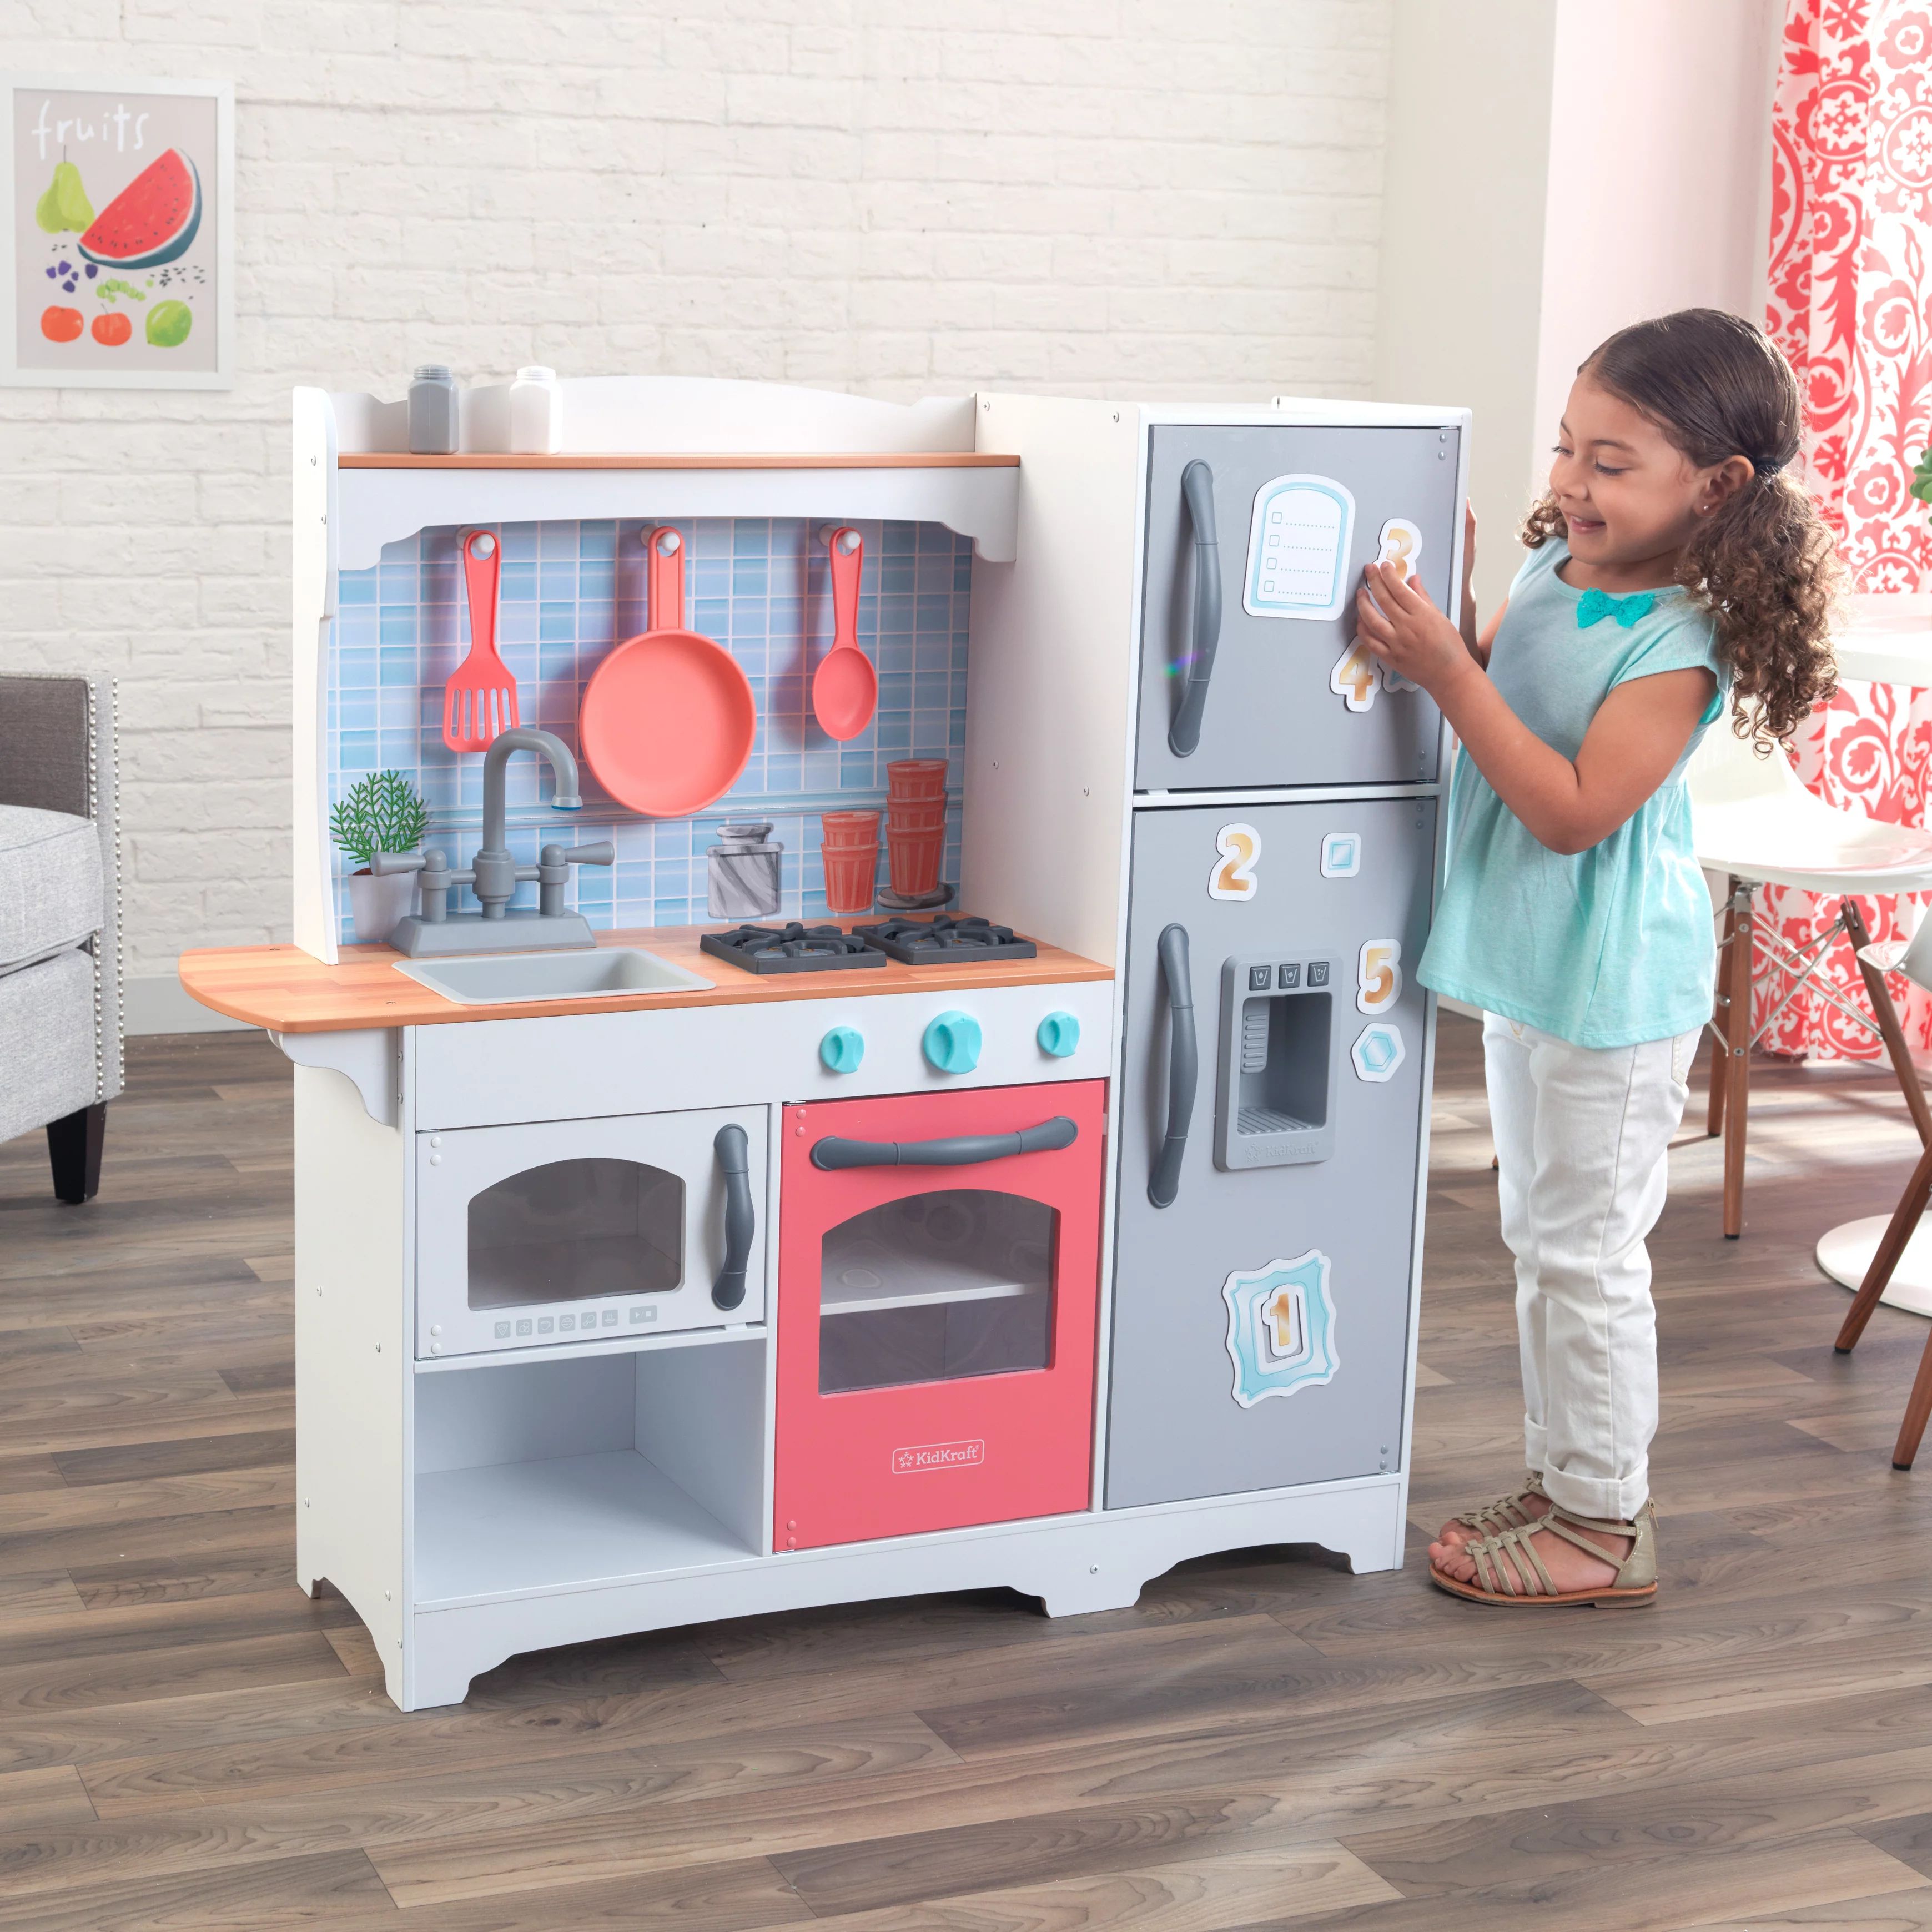 KidKraft Mosaic Magnetic Play Kitchen with 9 Piece Accessory Play Set - Coral | Walmart (US)